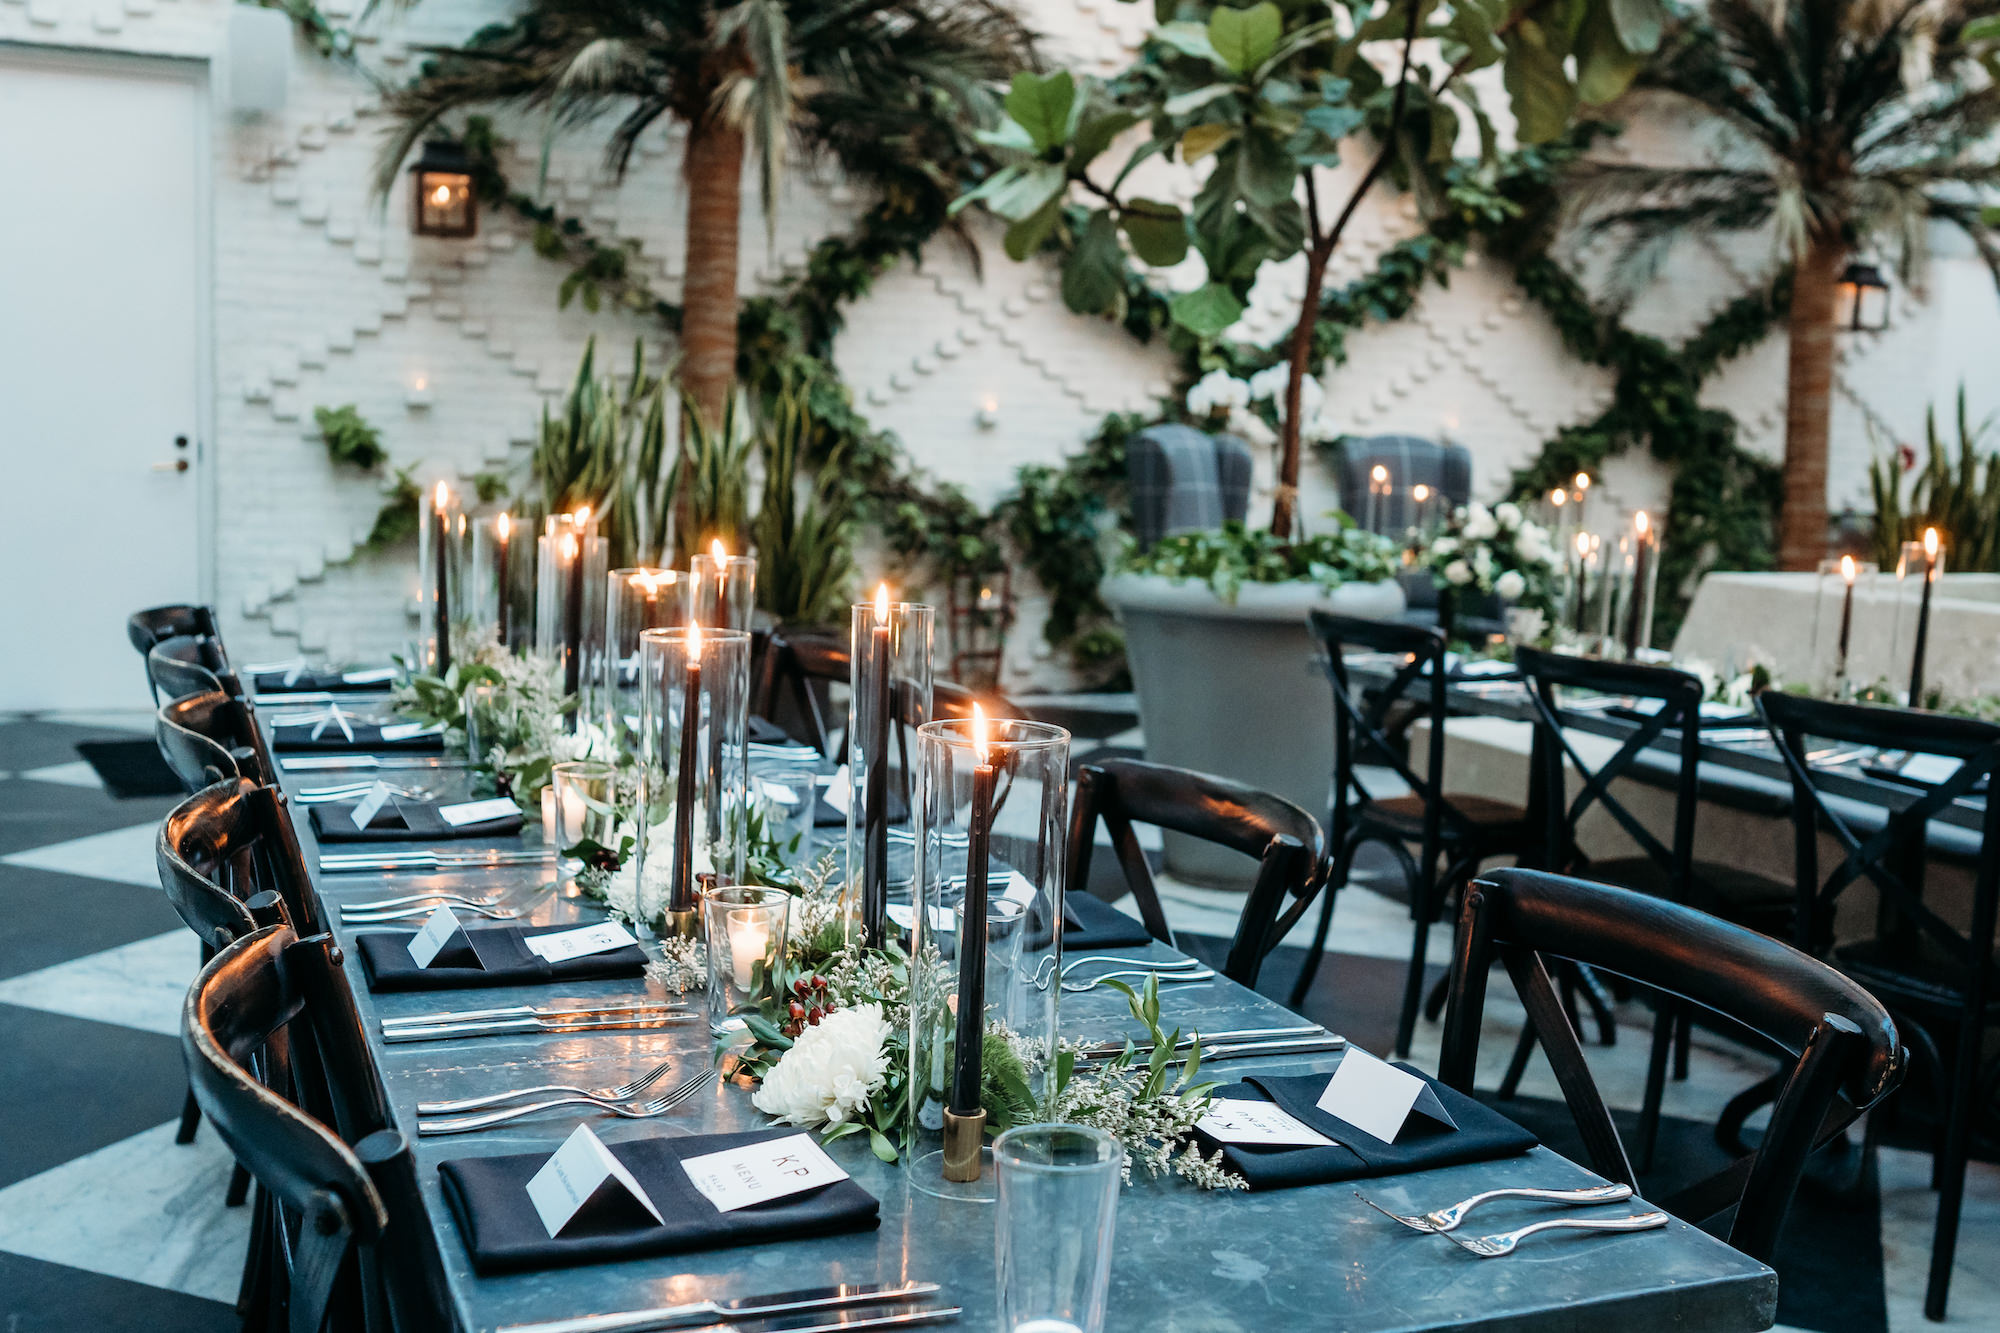 Modern Industrial Indoor Wedding Reception with Black Crossback Chairs, Candles, and Greenery Tablescape Centerpiece Inspiration | South Tampa Wedding Venue Oxford Exchange Conservatory